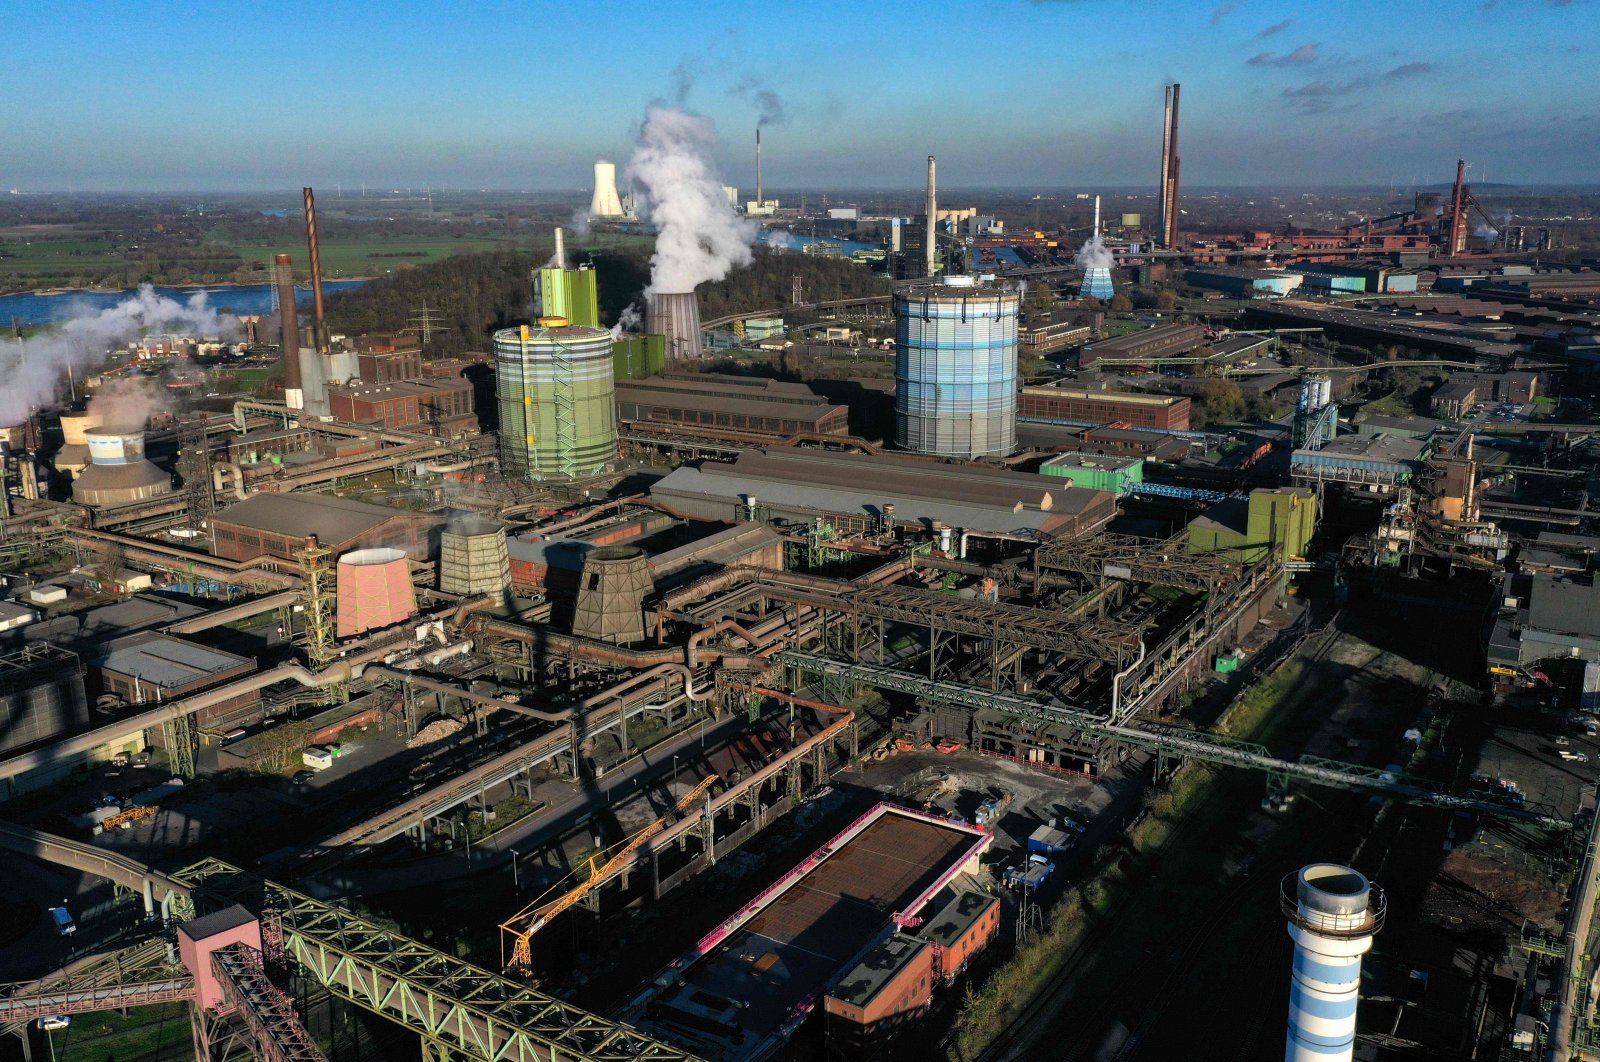 This aerial view shows the plant of German industrial conglomerate ThyssenKrupp in Duisburg, western Germany, Nov. 18, 2020. (AFP Photo)